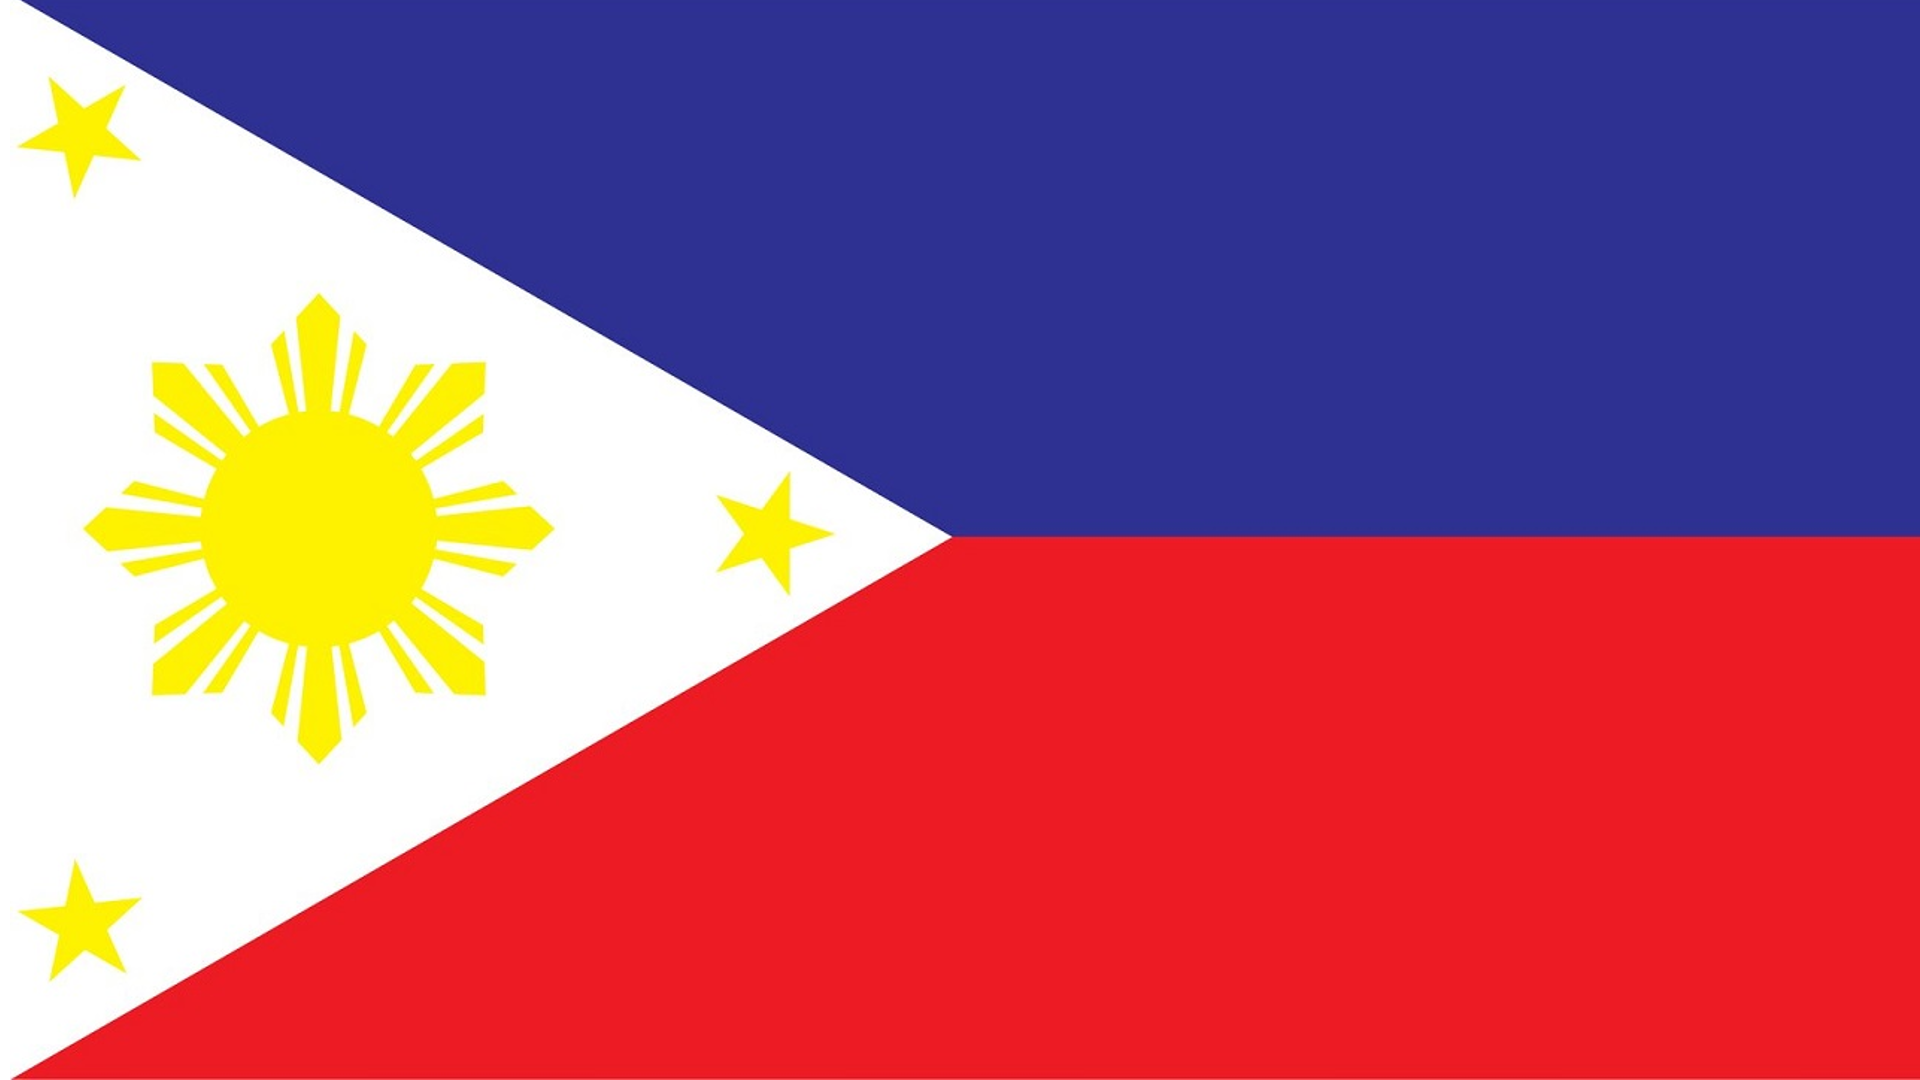 An image of the flag of the Phillippines